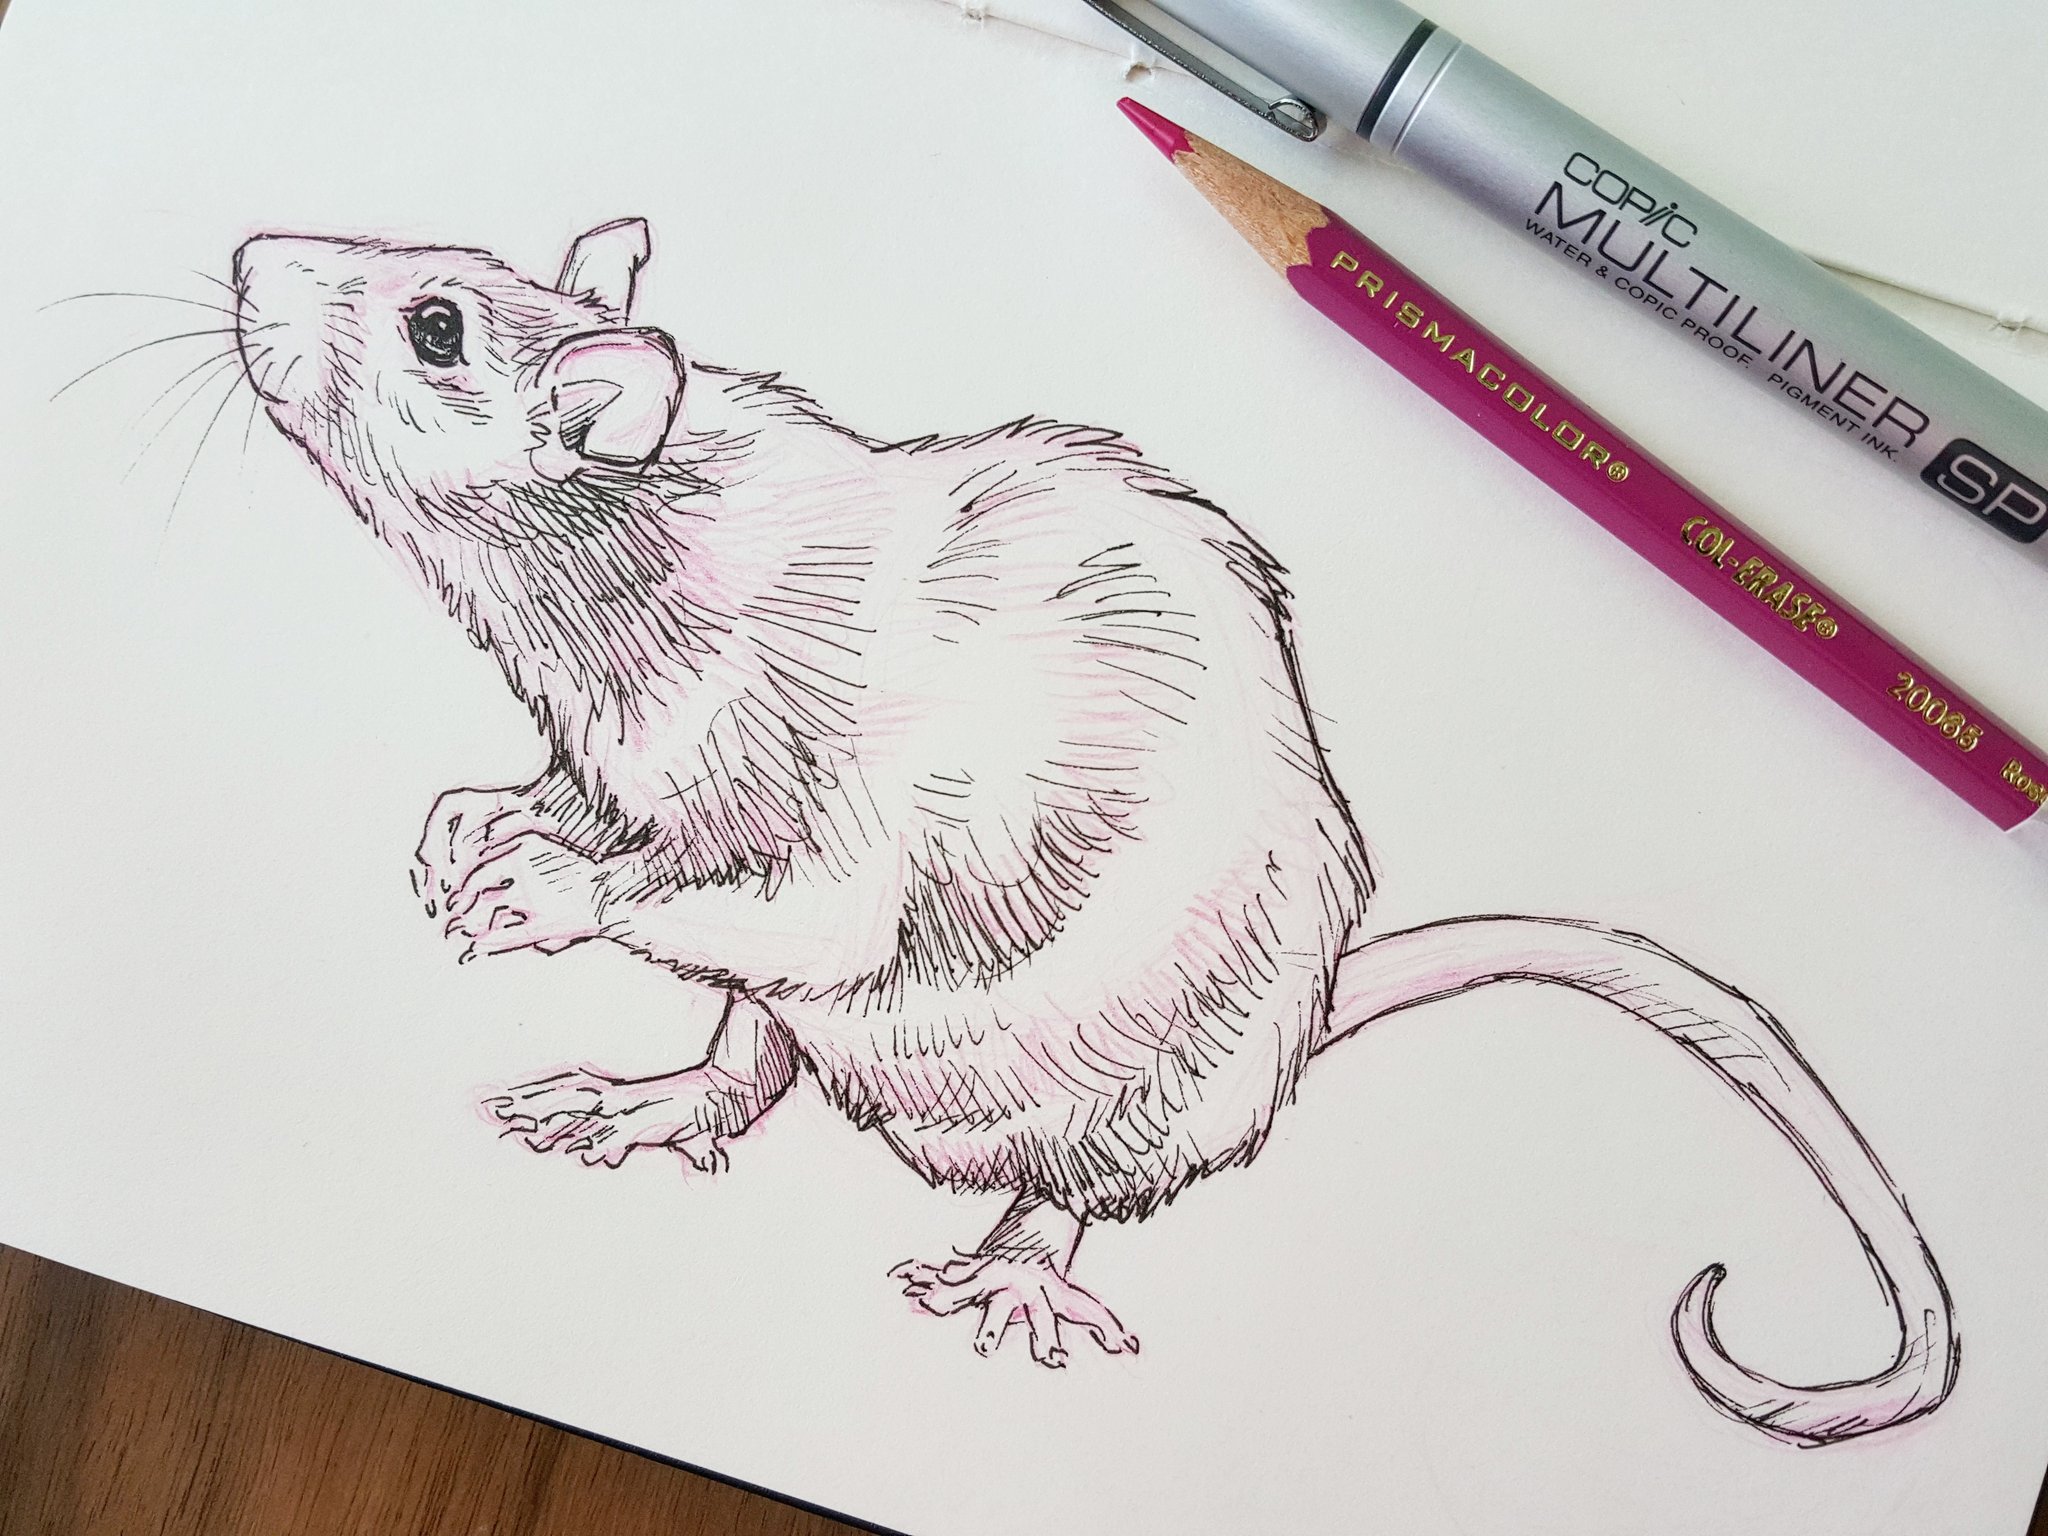 How to Draw a Realistic Rat | Realistic Rat Sketch Tutorial for Beginners |  Step by Step - YouTube